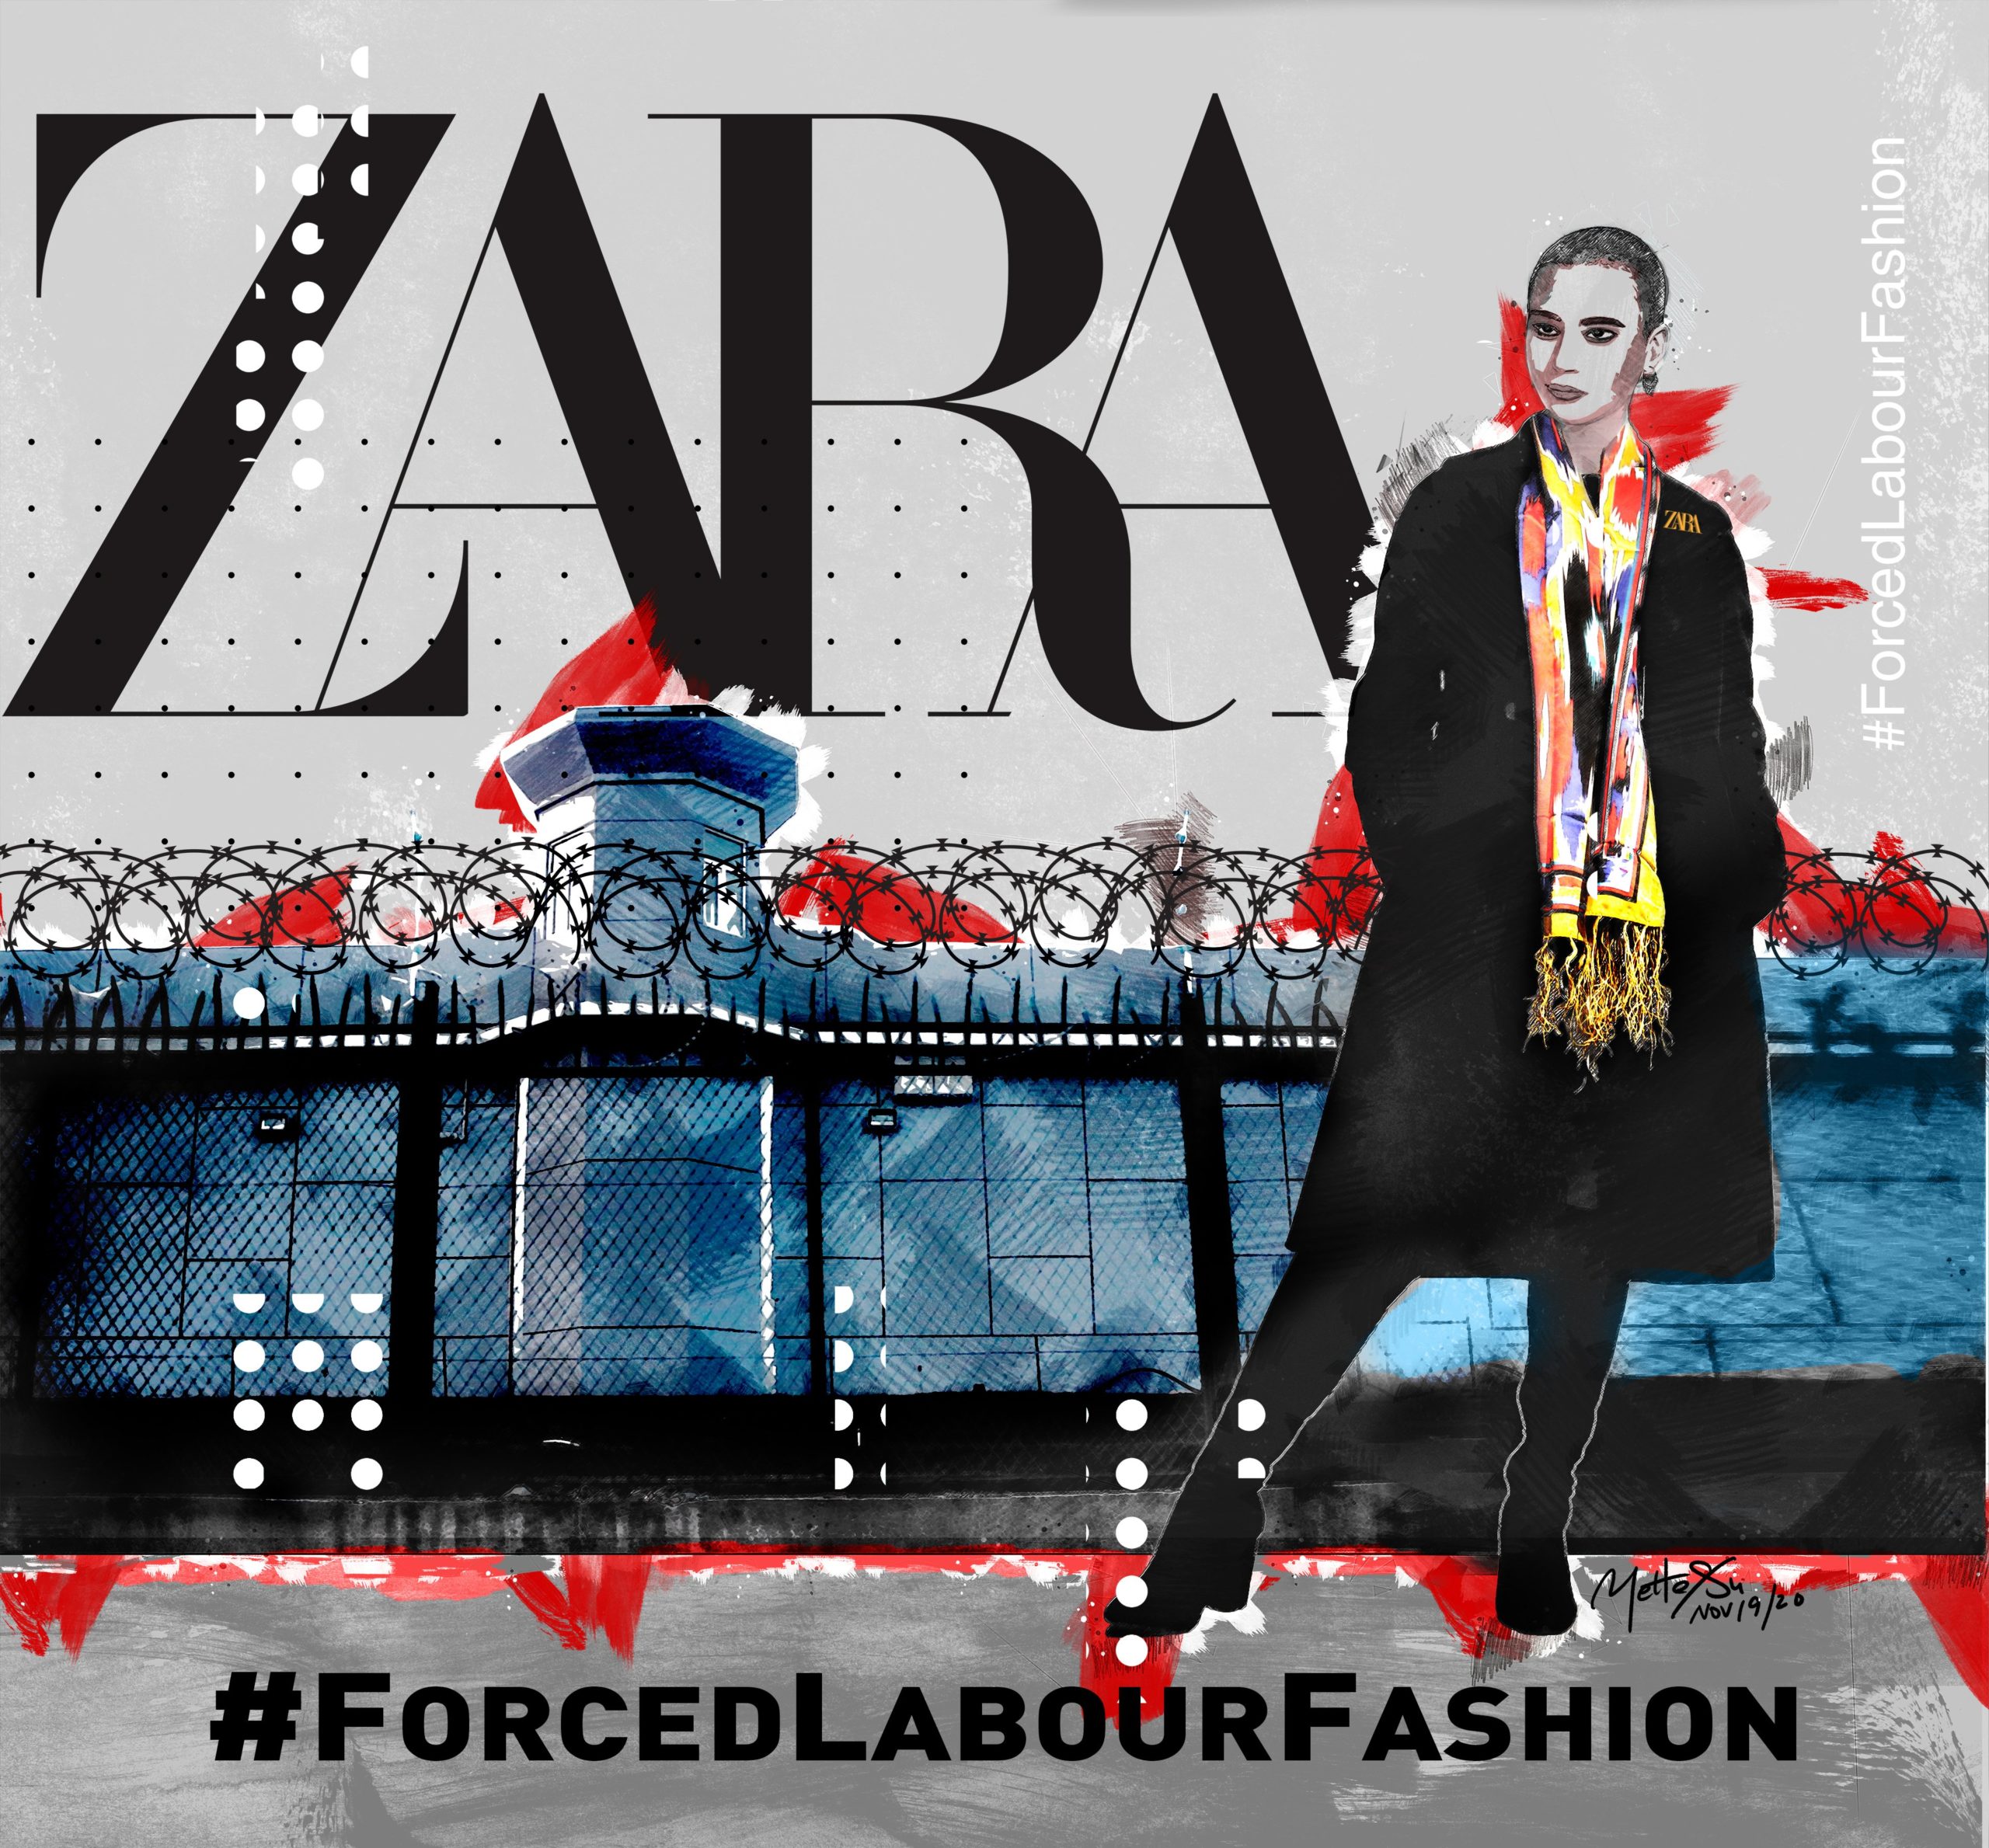 It’s time for Zara to end its complicity in Uyghur forced labour